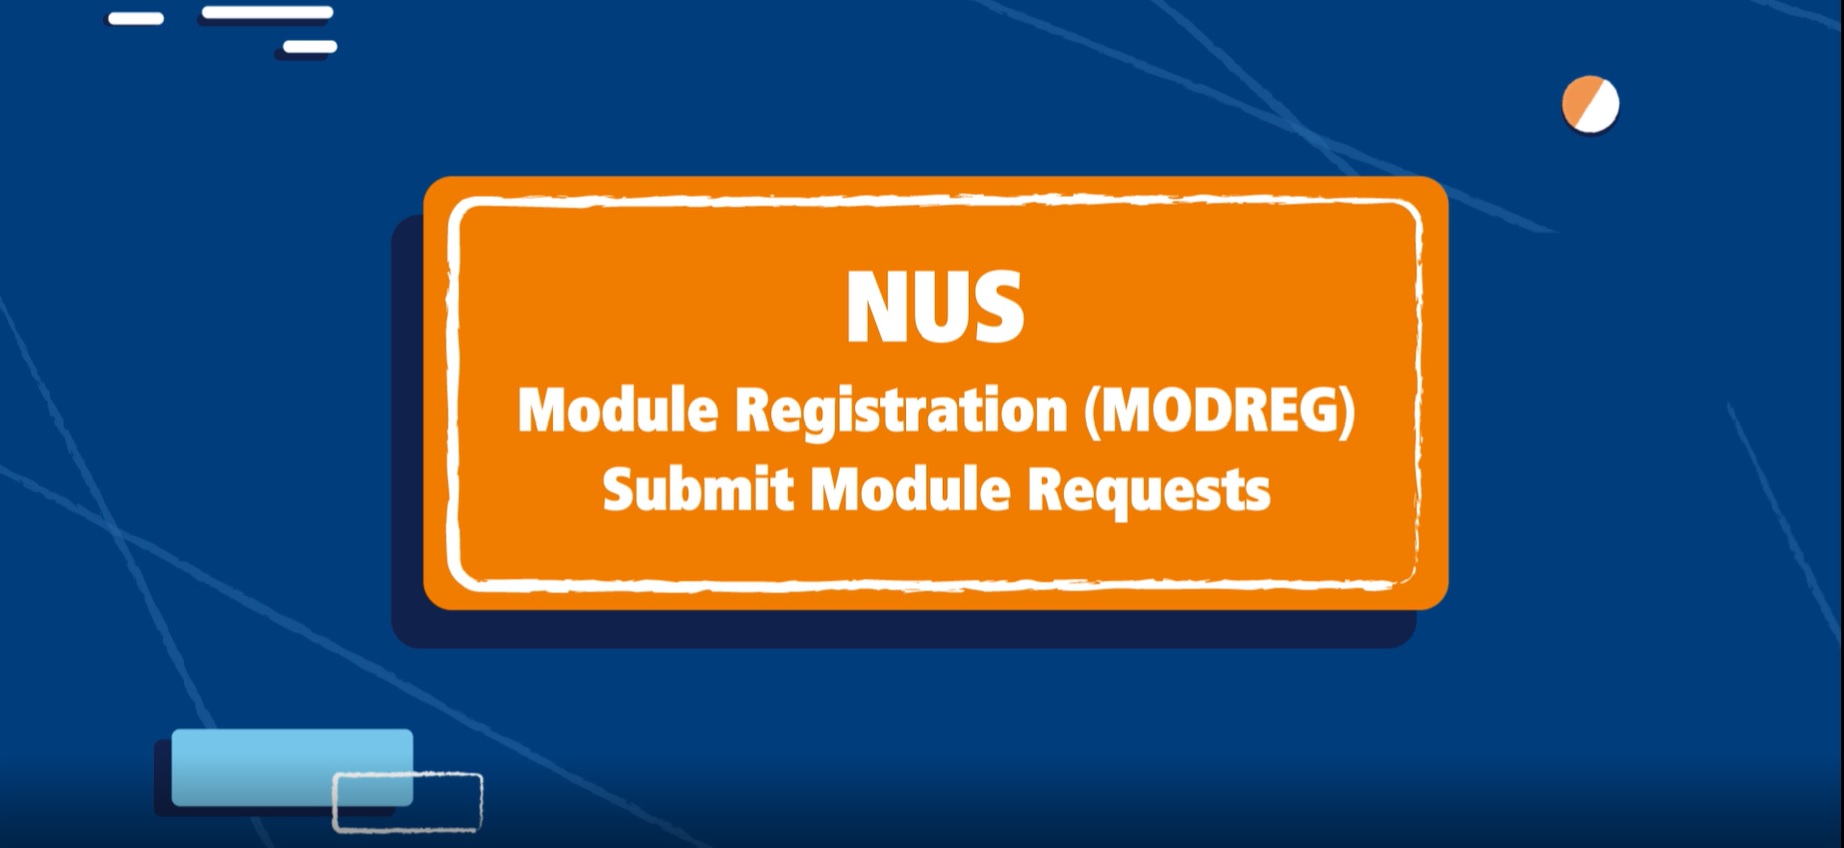 How to - Submit Module Requests